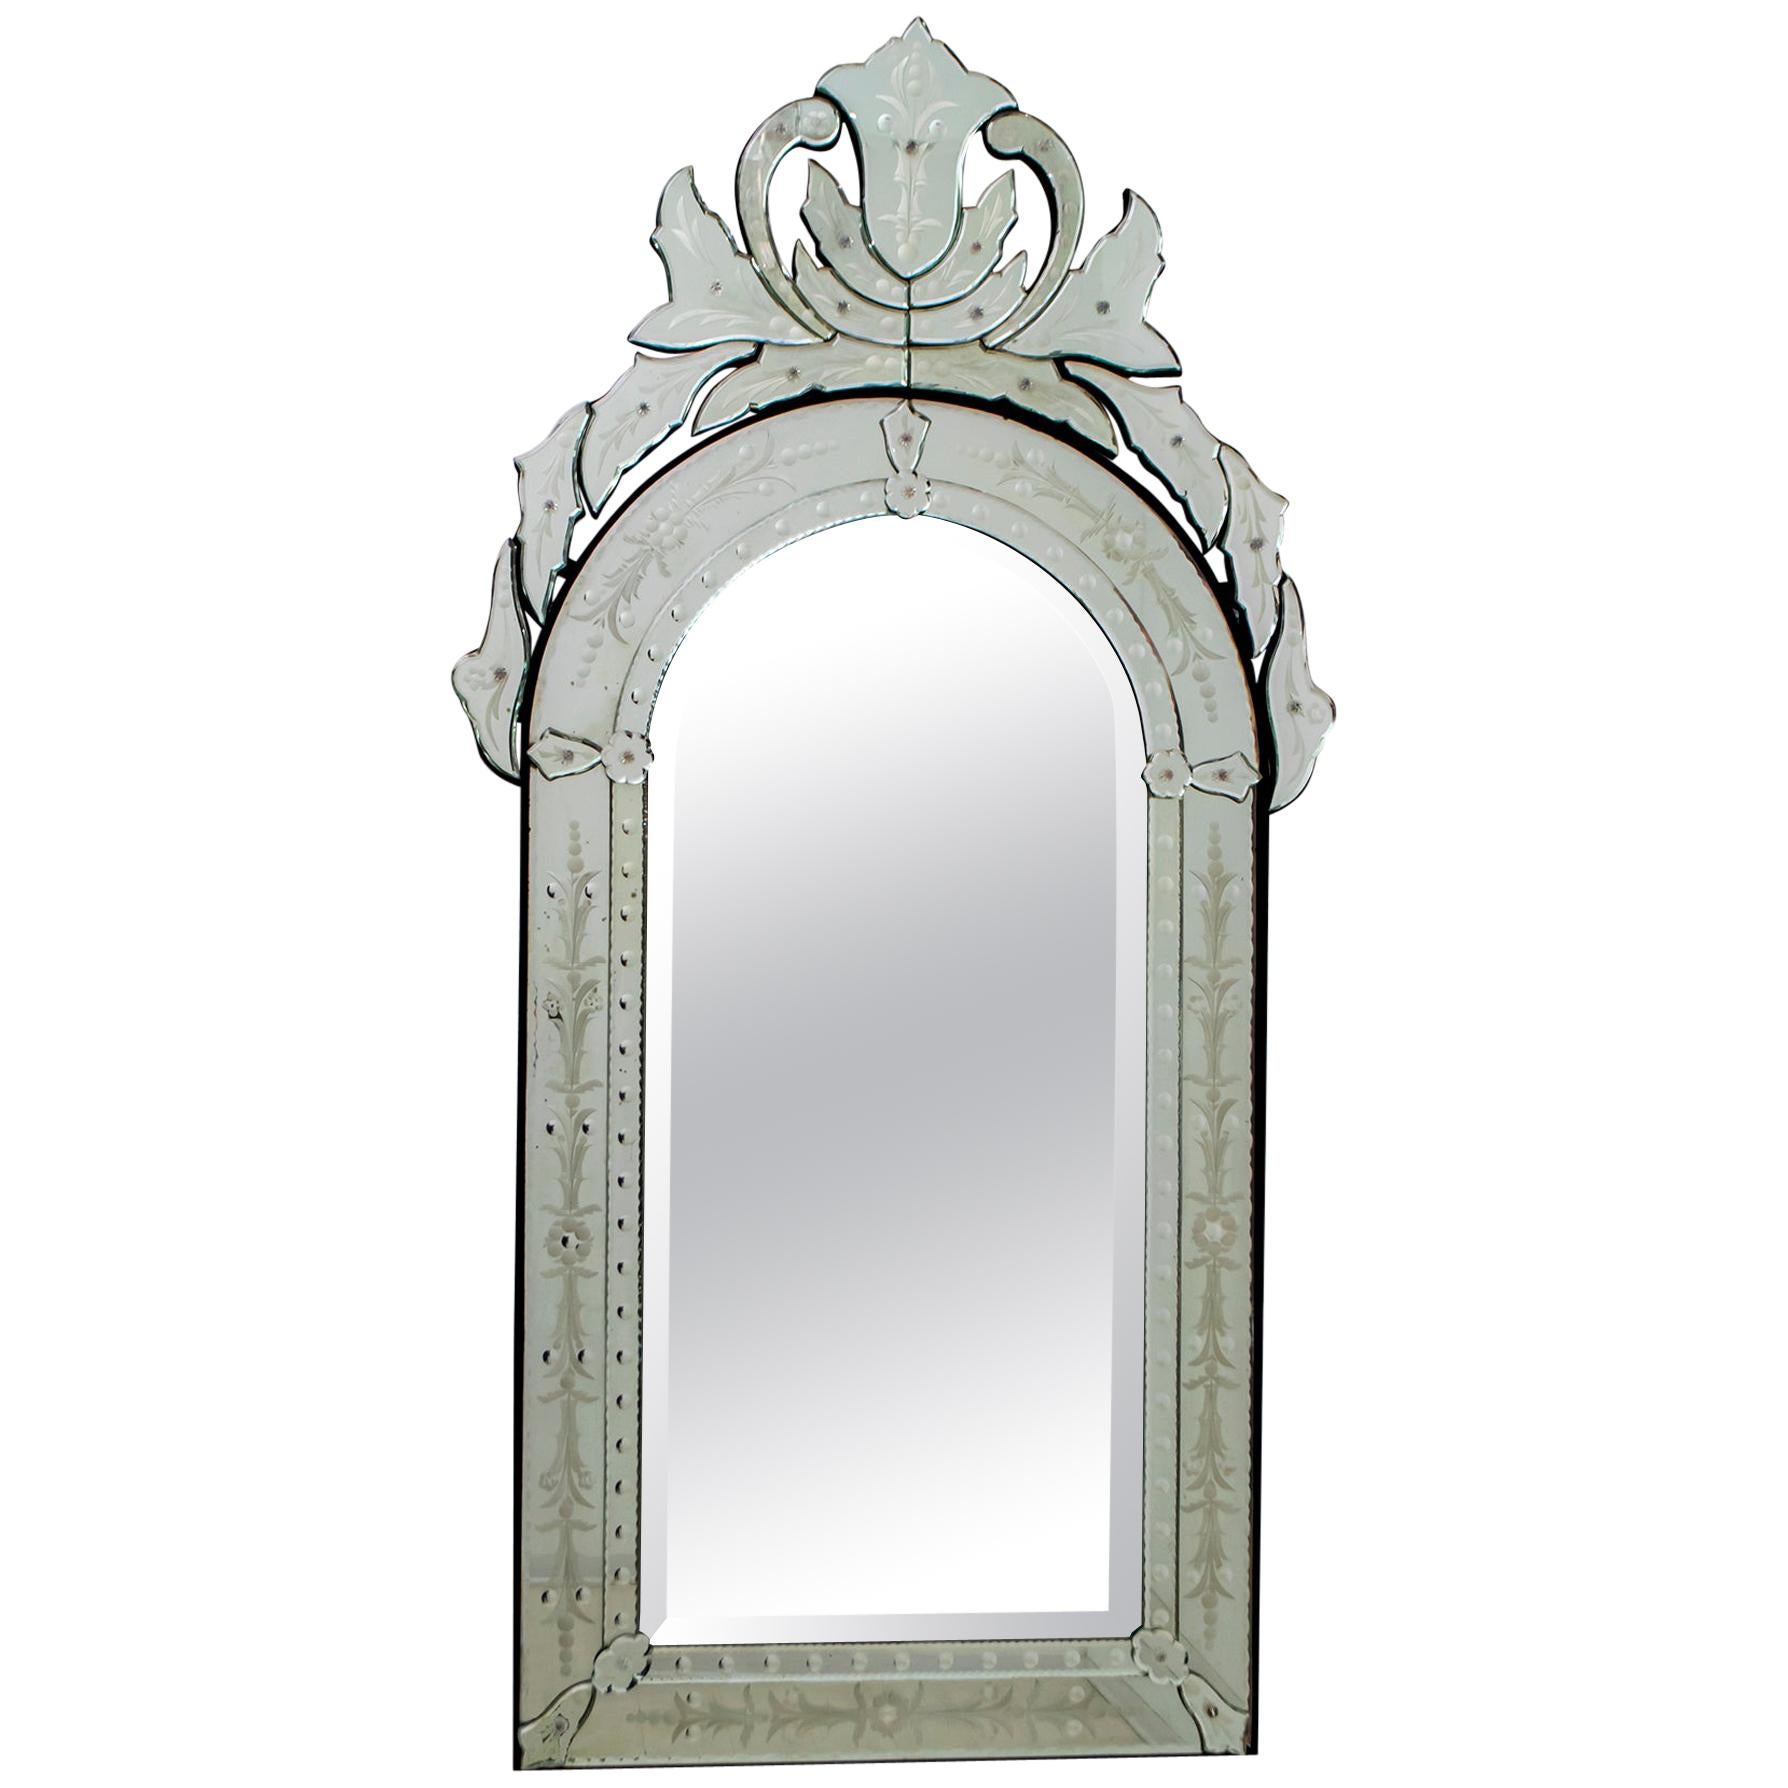 Mid-Century Modern Venetian Etched and Beveled Mirror, 1950s